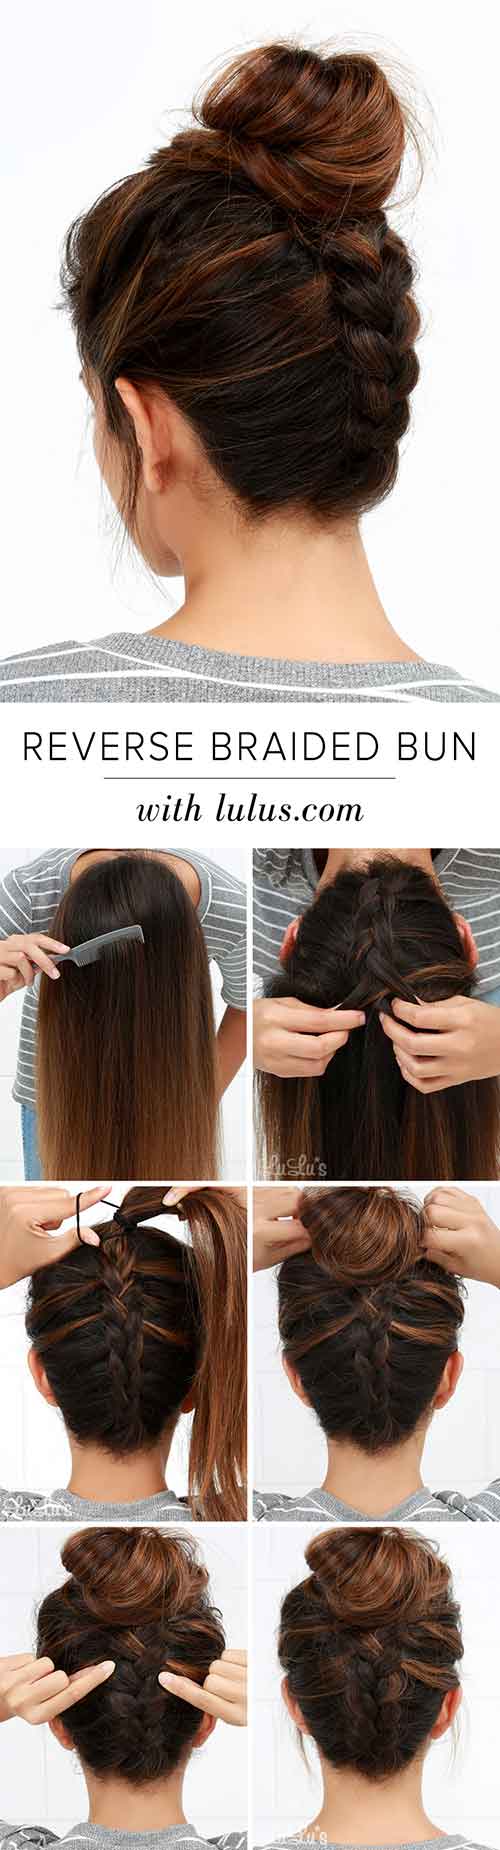 How to Braid Hair: 10 Tutorials You Can Do Yourself